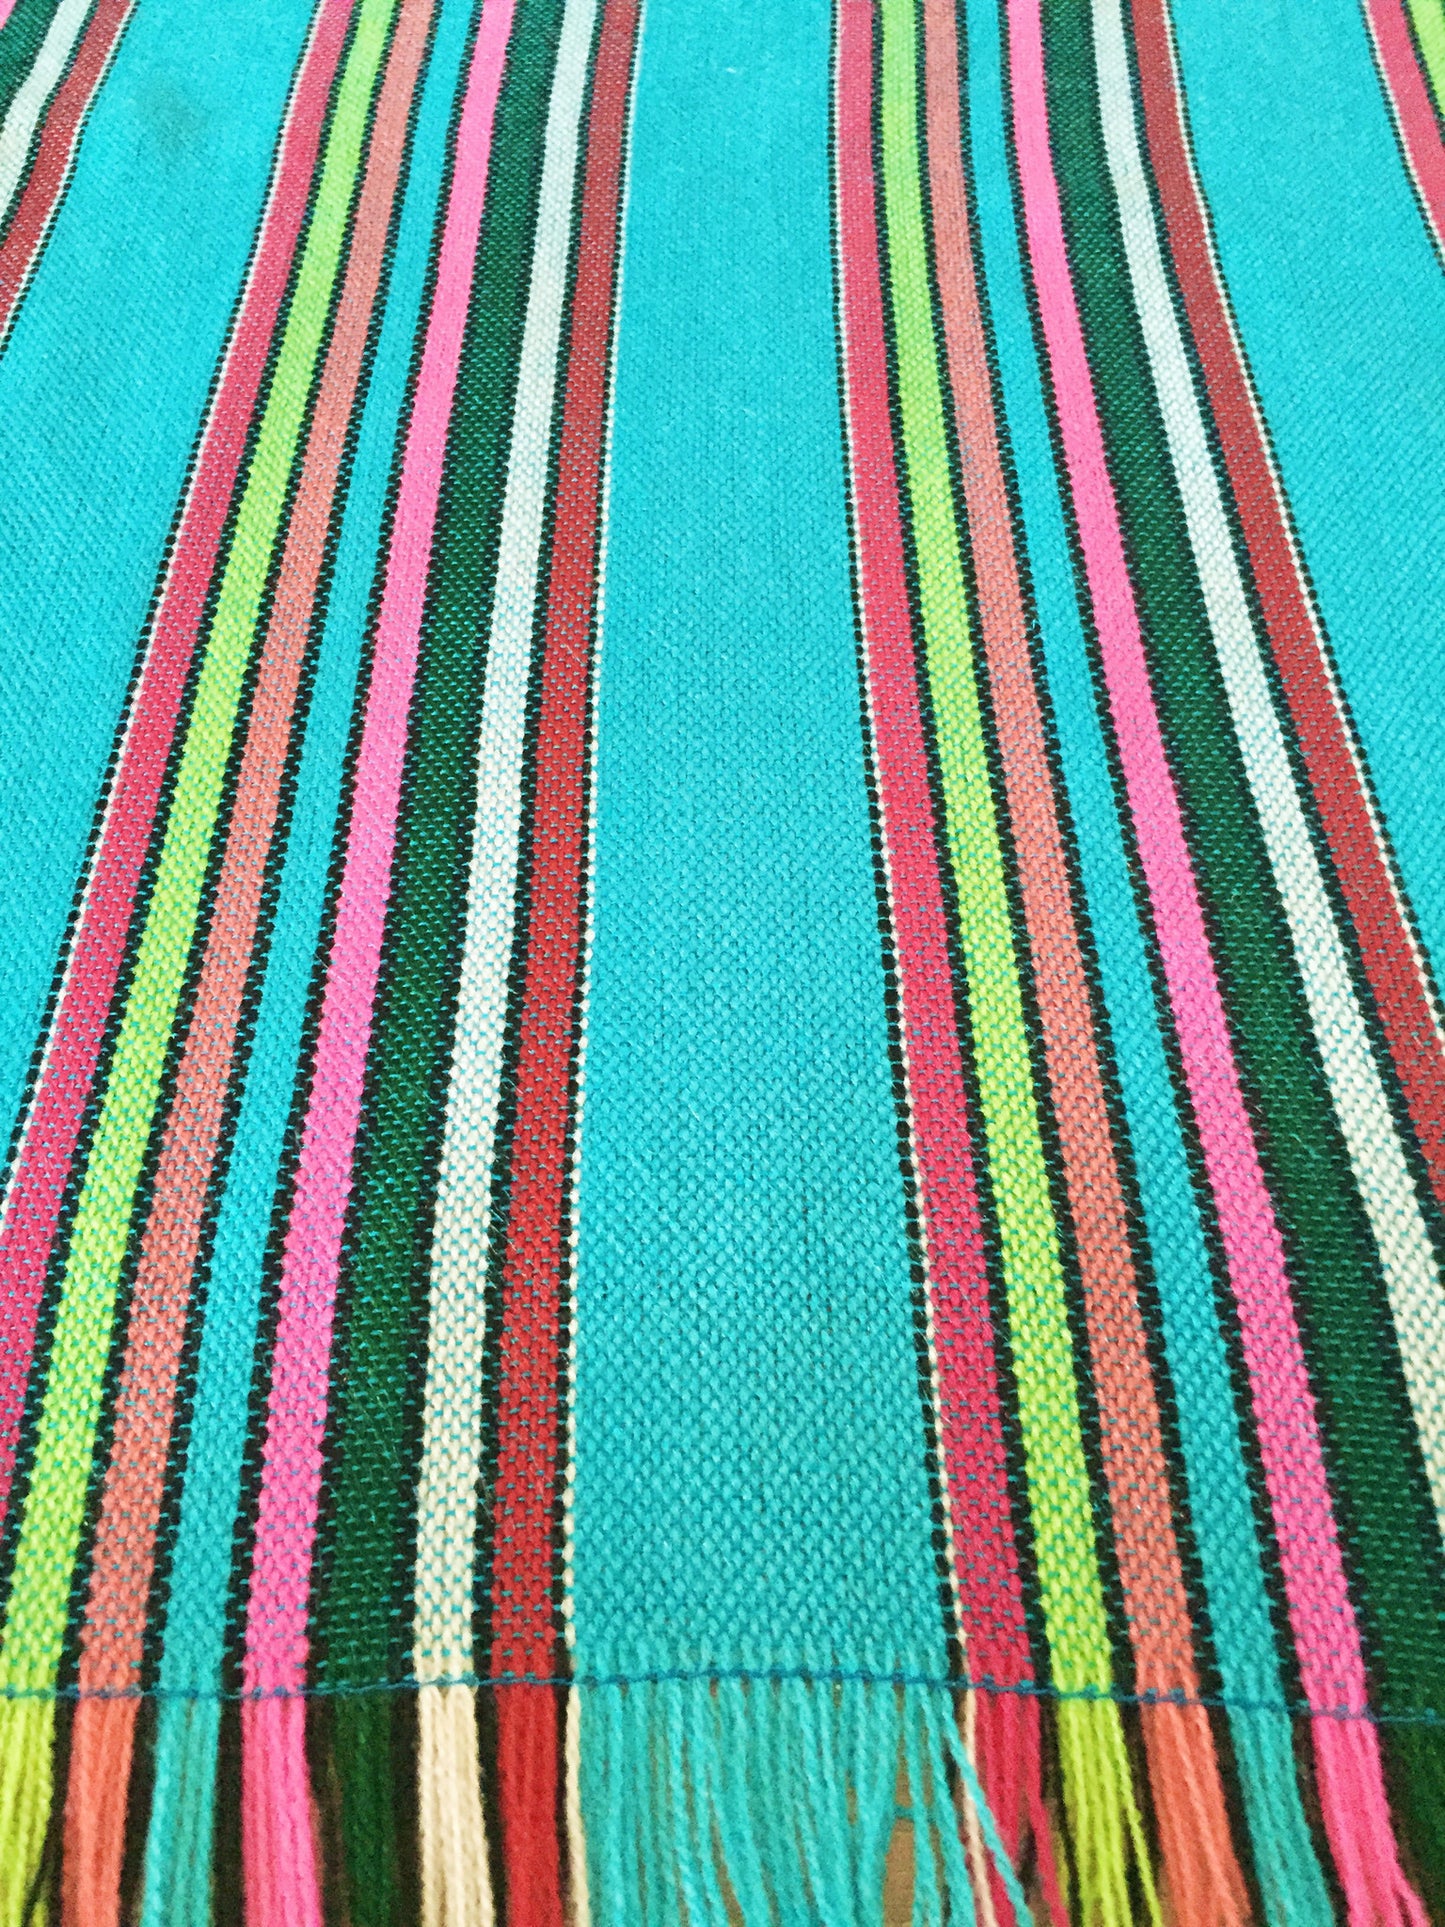 Mexican Fabric Table Runner Colorful Teal Stripes - MesaChic - 3